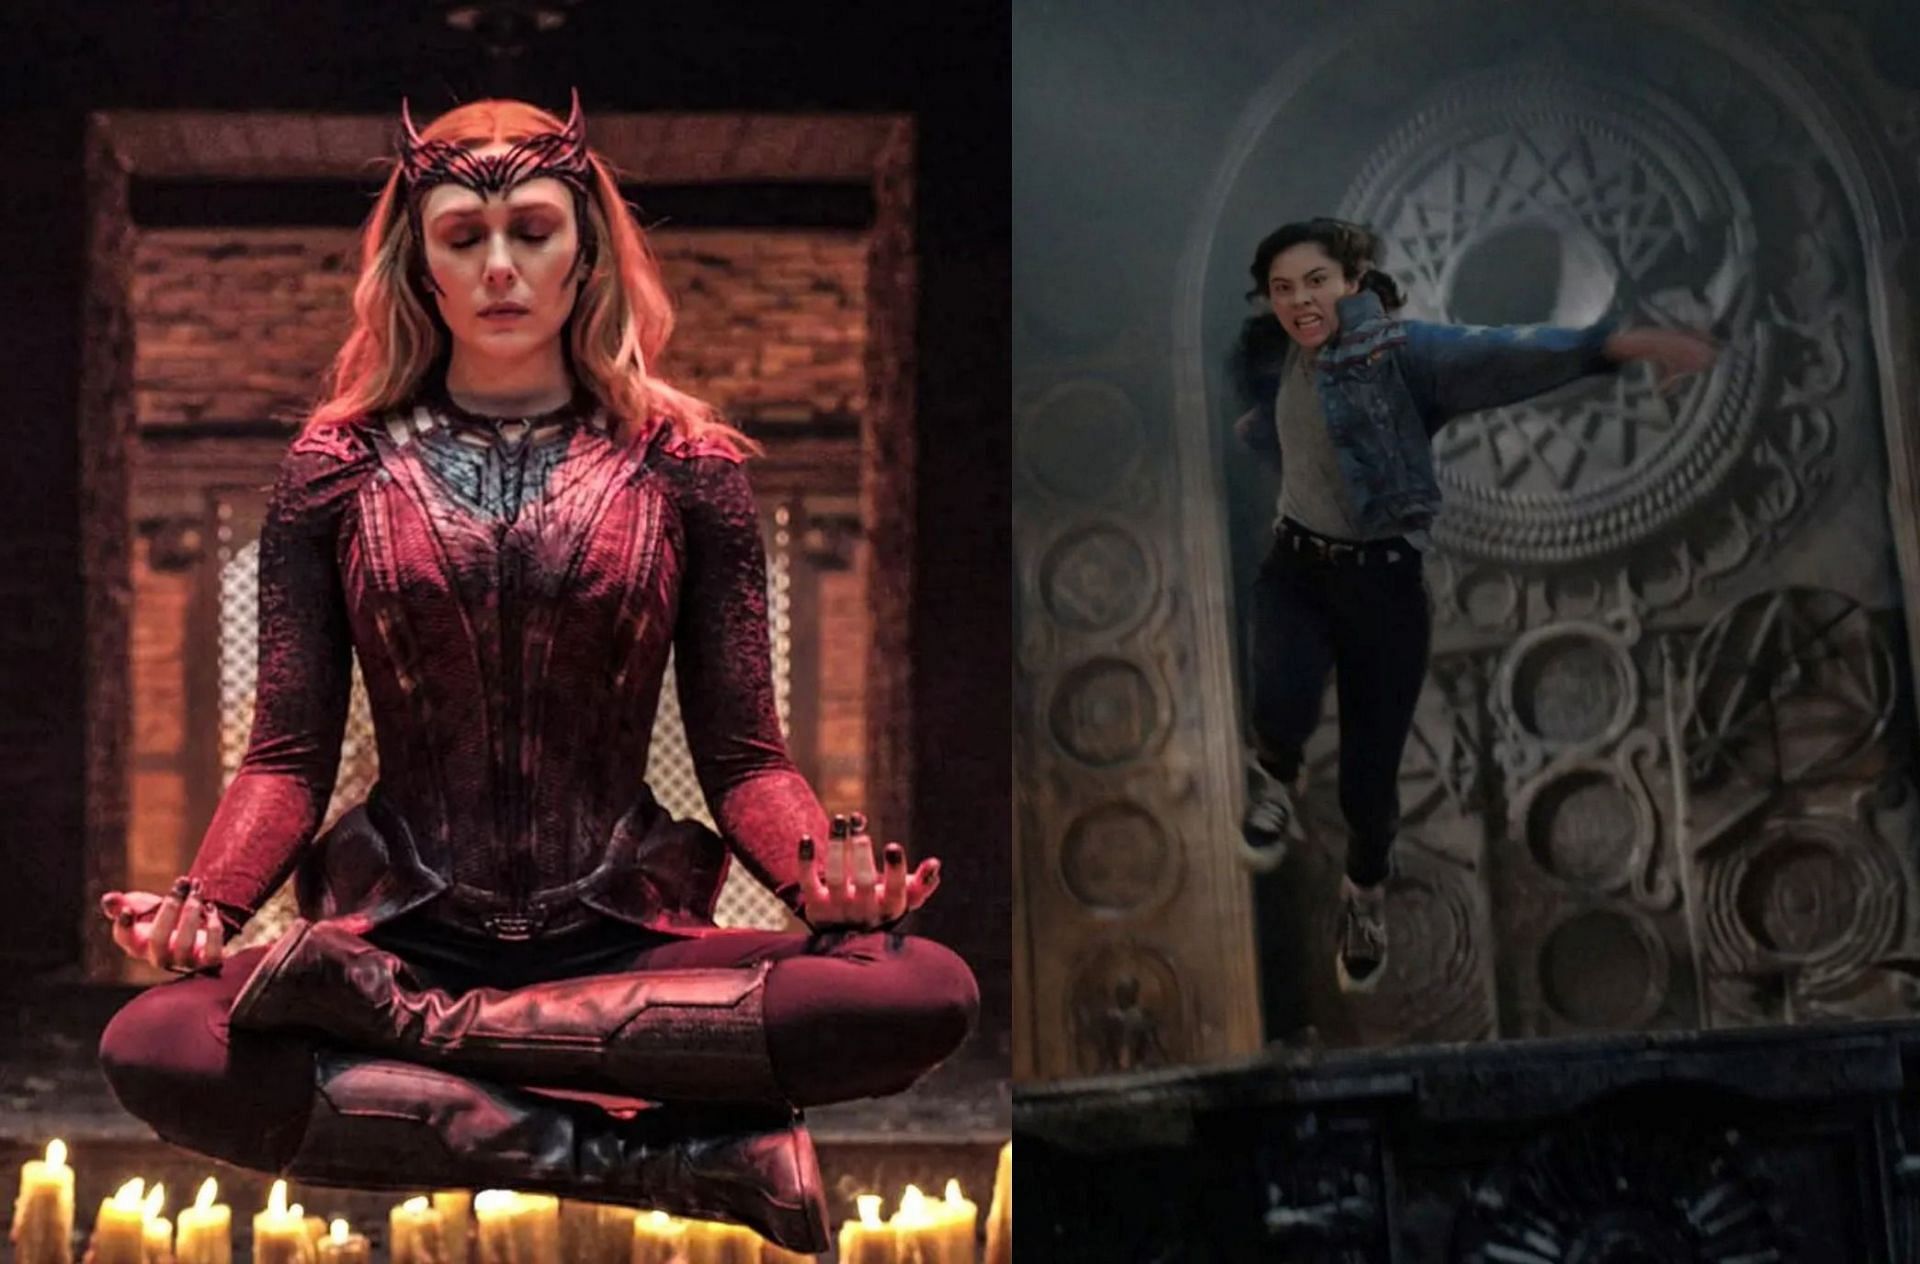 Scarlet Witch and America Chavez in the film (Image via Marvel Studios)